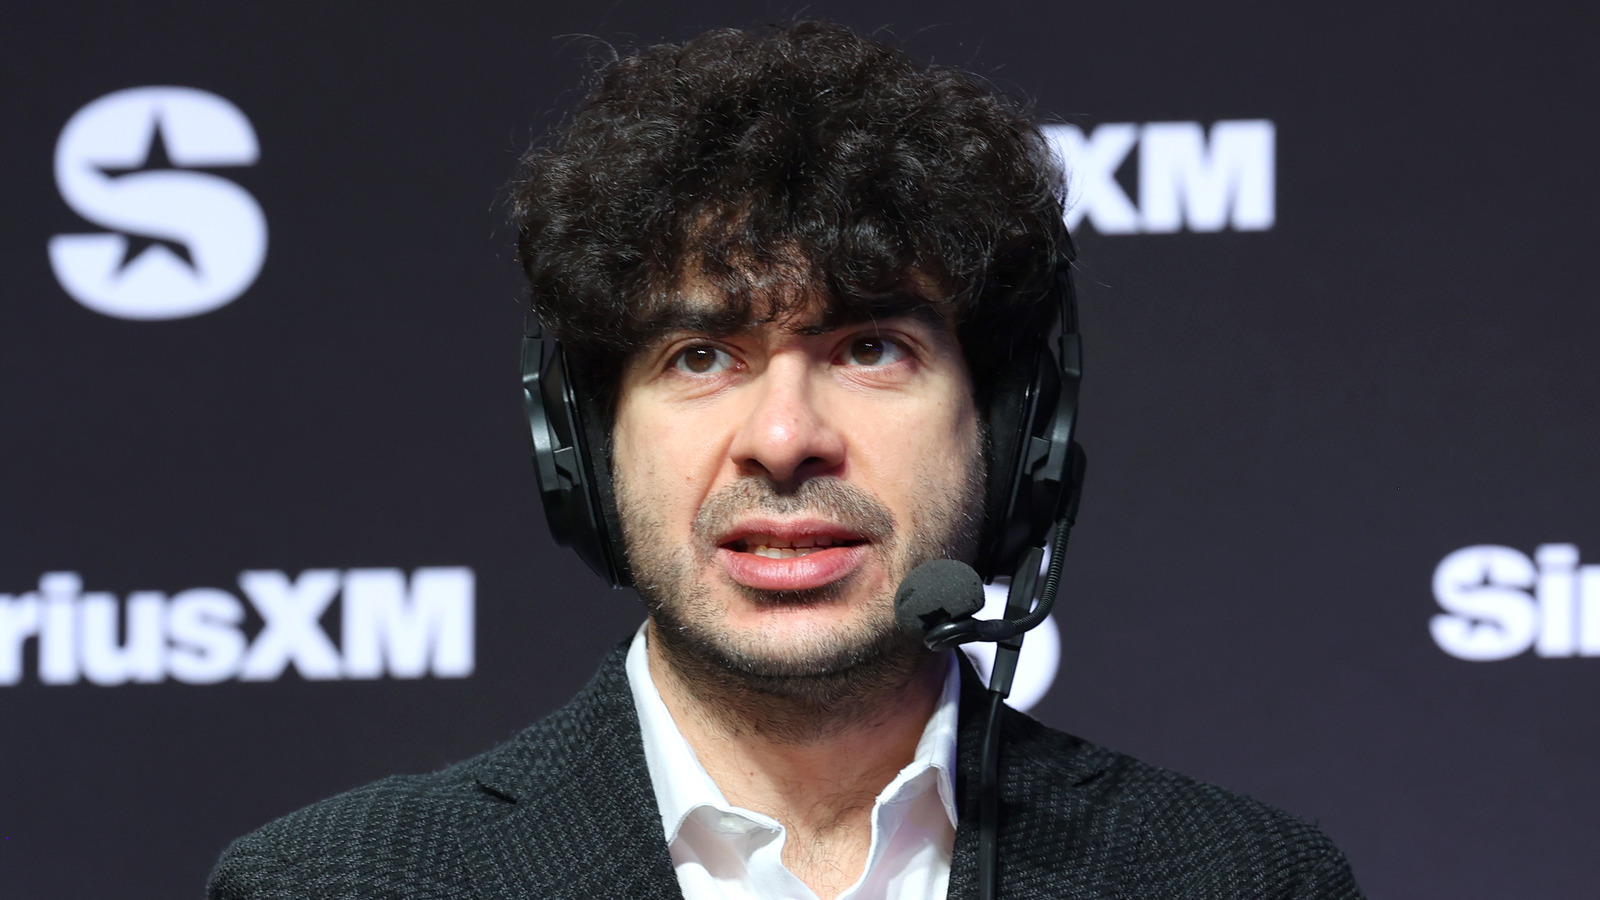 Tony Khan Makes 'Significant' Announcement About Tonight's AEW Dynamite